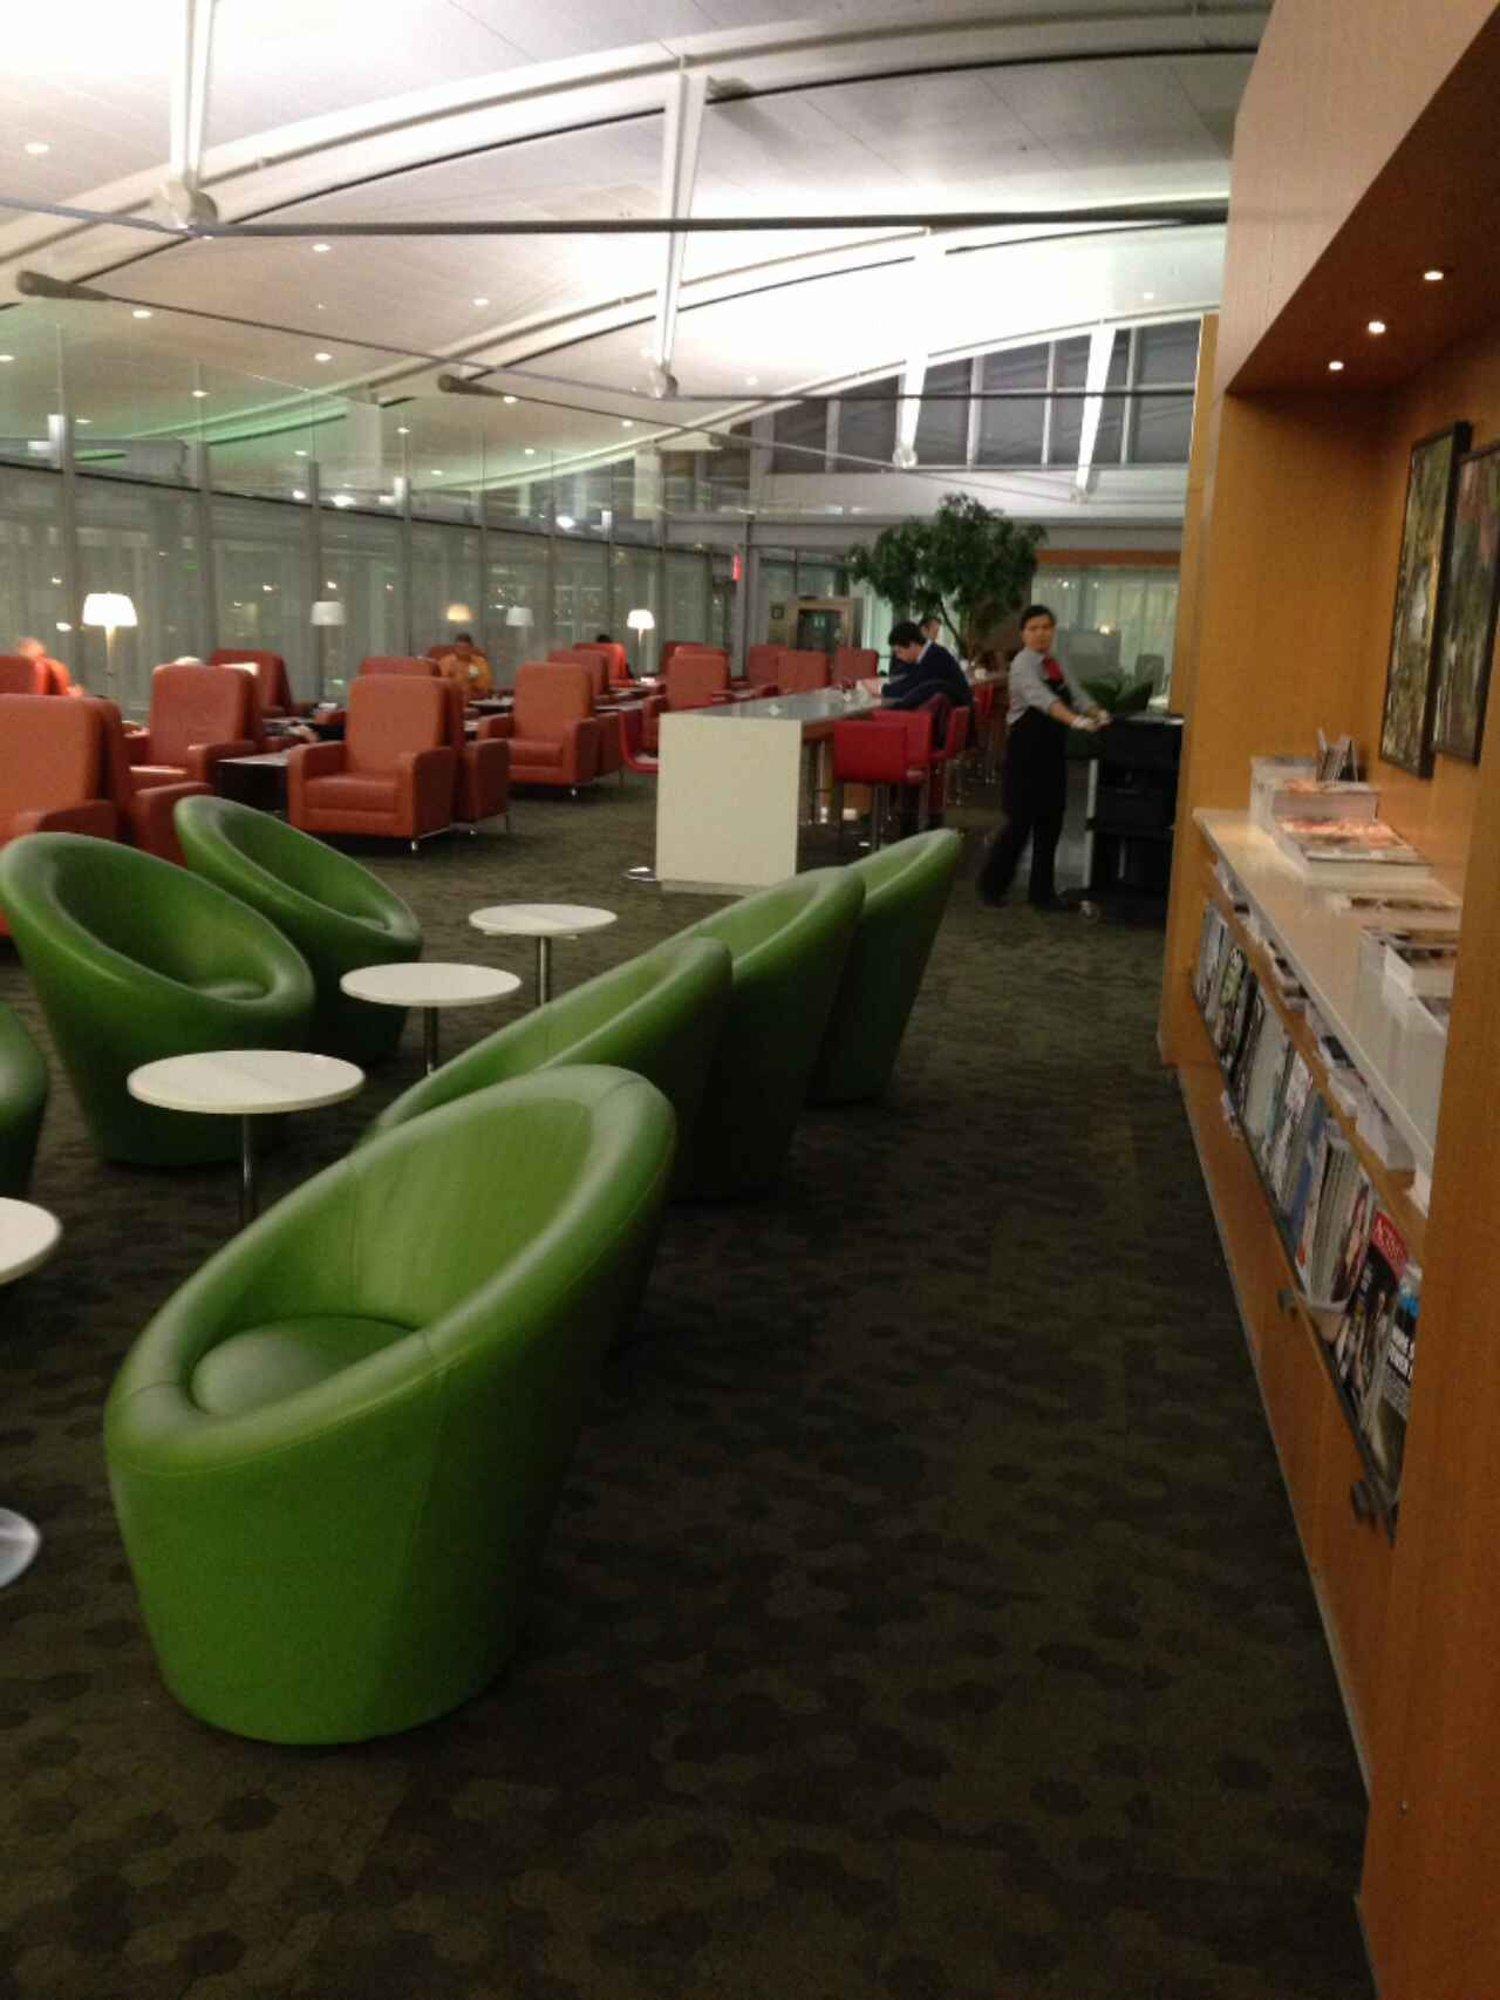 Air Canada Maple Leaf Lounge image 11 of 27